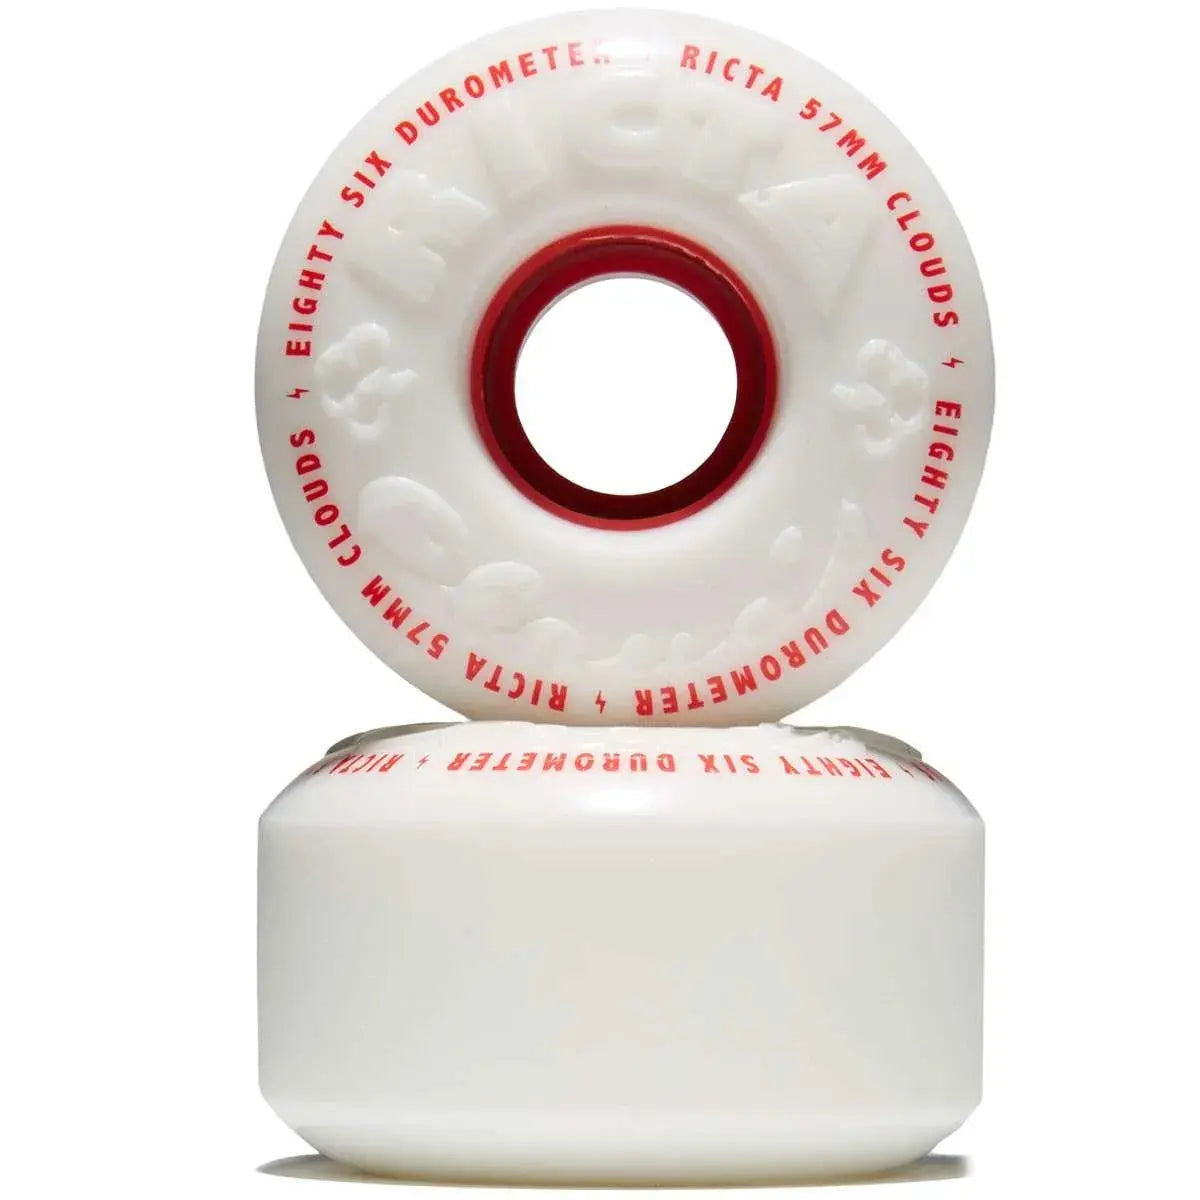 RICTA CLOUDS 86A 55MM WHEELS - RED RICTA